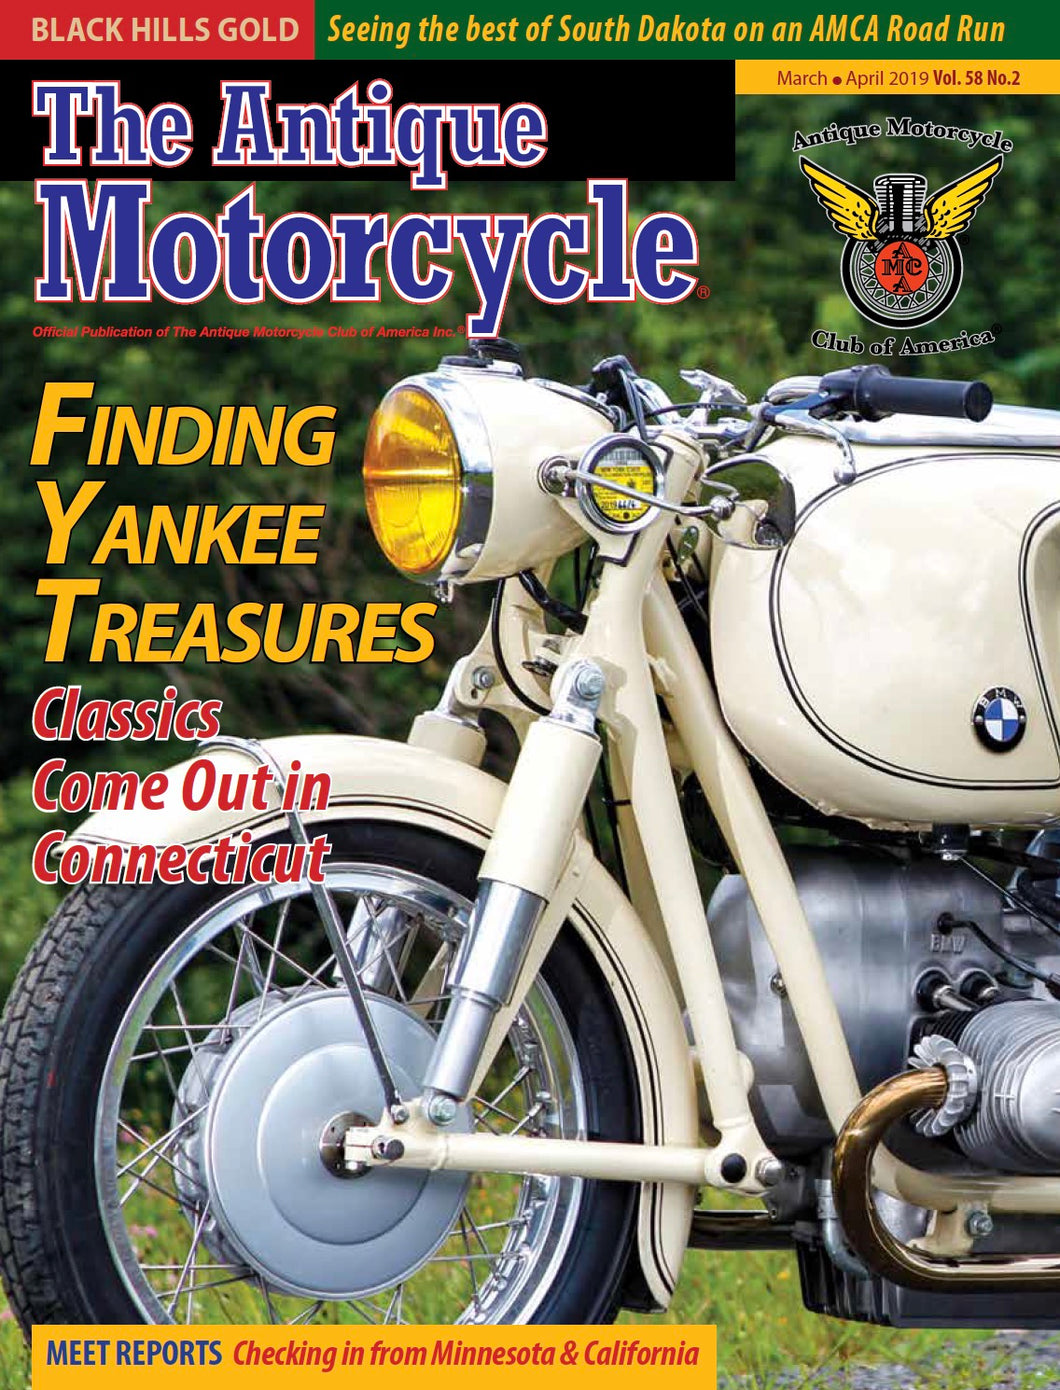 The Antique Motorcycle: Vol. 58, Iss. 2 - Mar/Apr 2019 Magazine